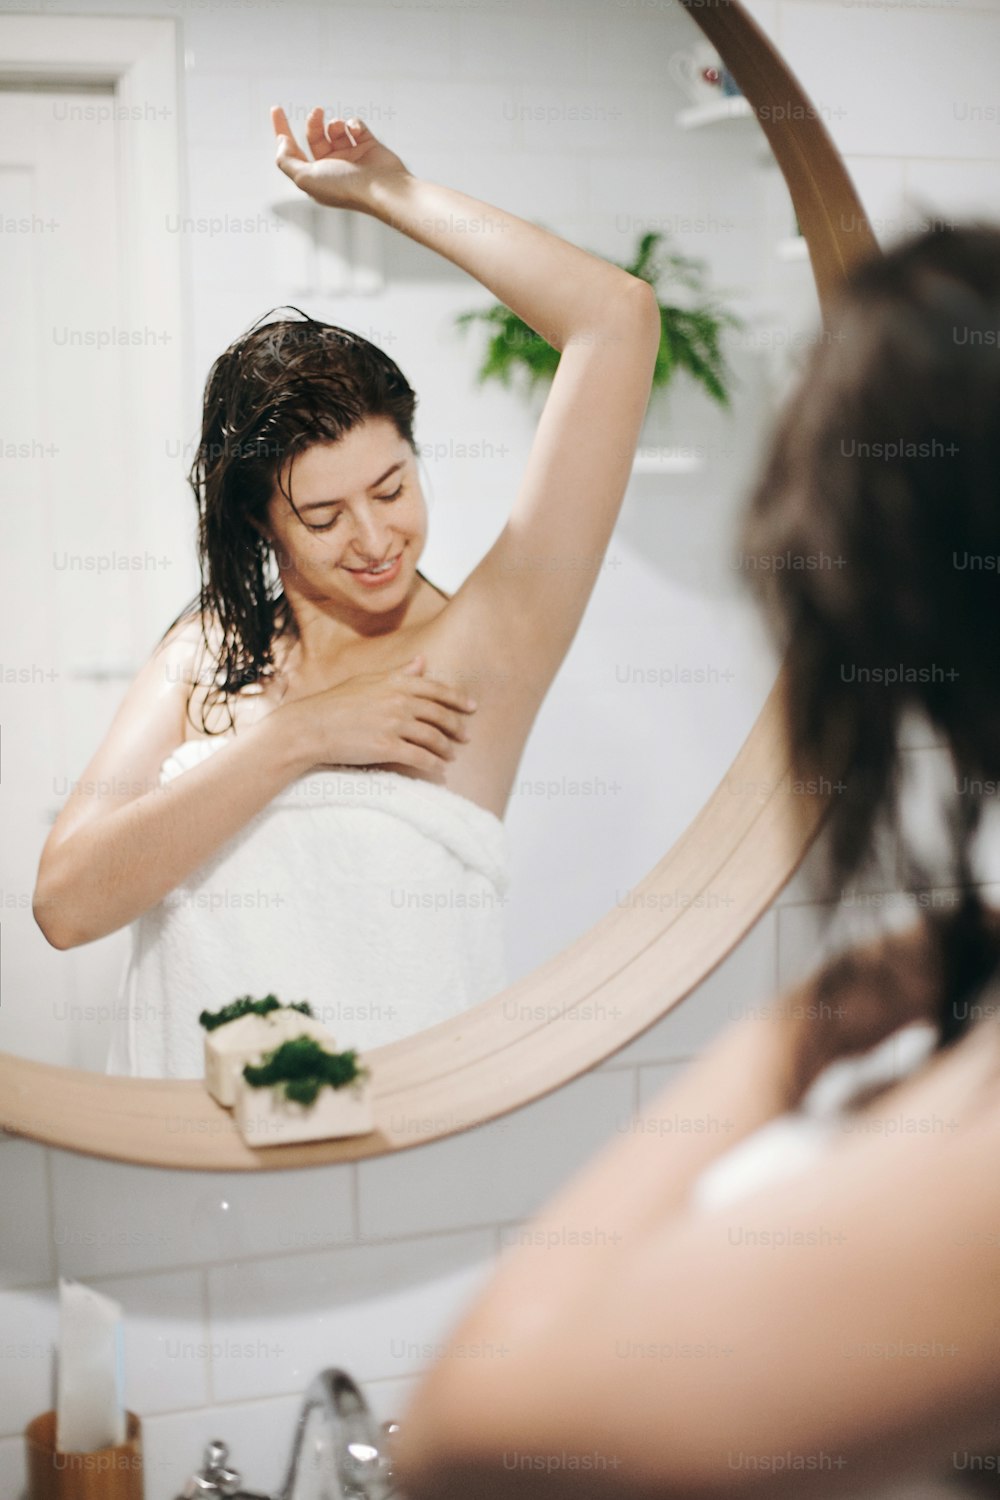 Young attractive woman with wet hair in white towel looking at  smooth soft skin after shaving armpits, reflection in mirror in stylish bathroom with greenery. Skin and body care, wellness concept